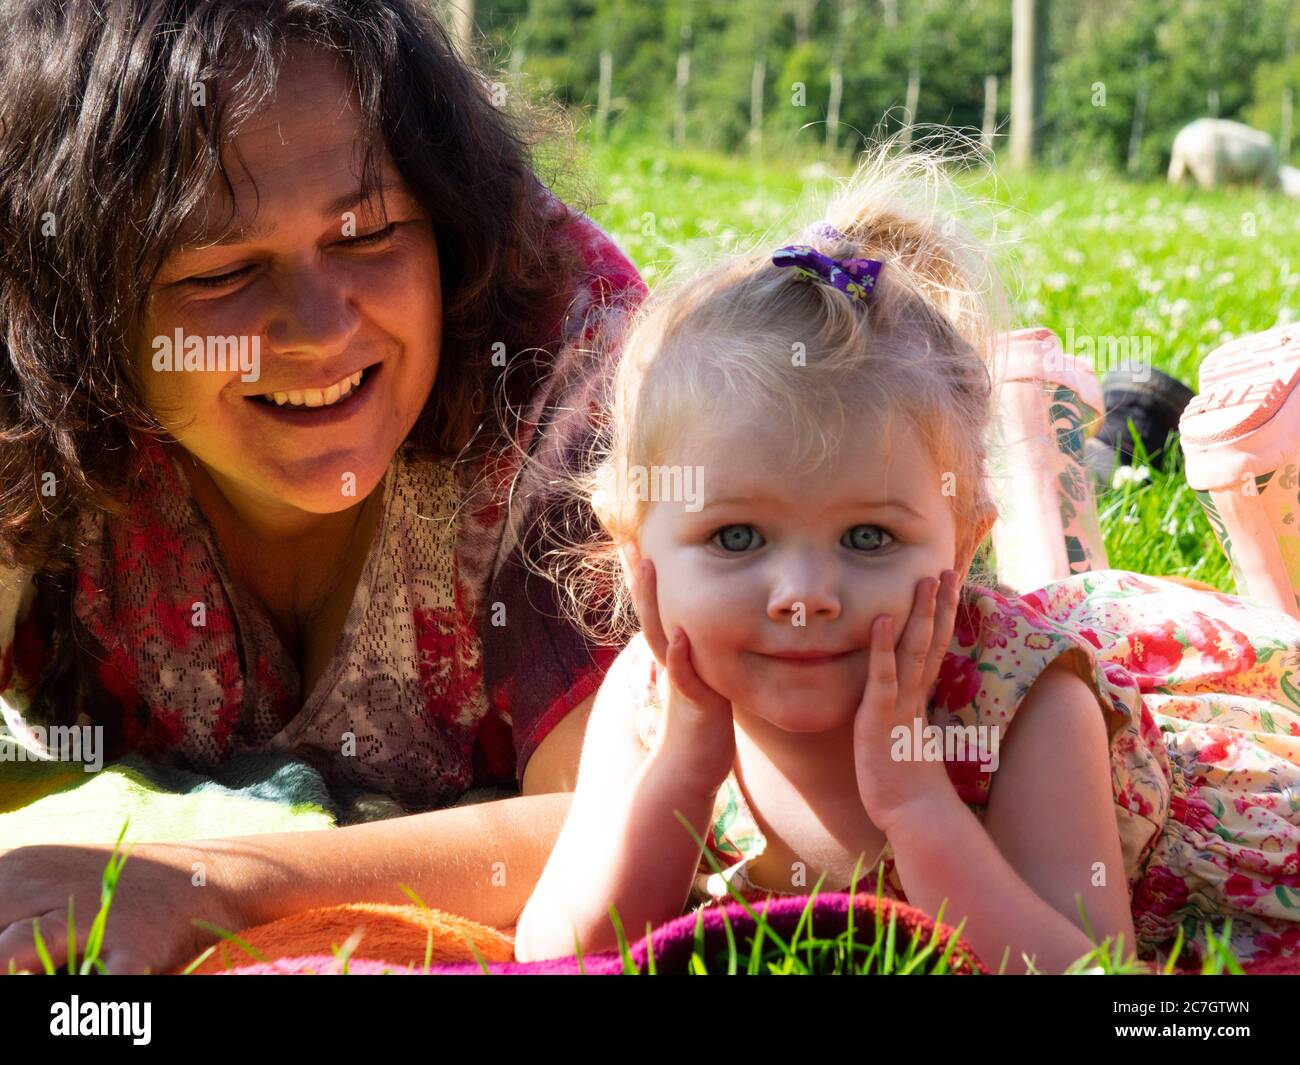 Toddler and granny lying on the grass, UK Stock Photo